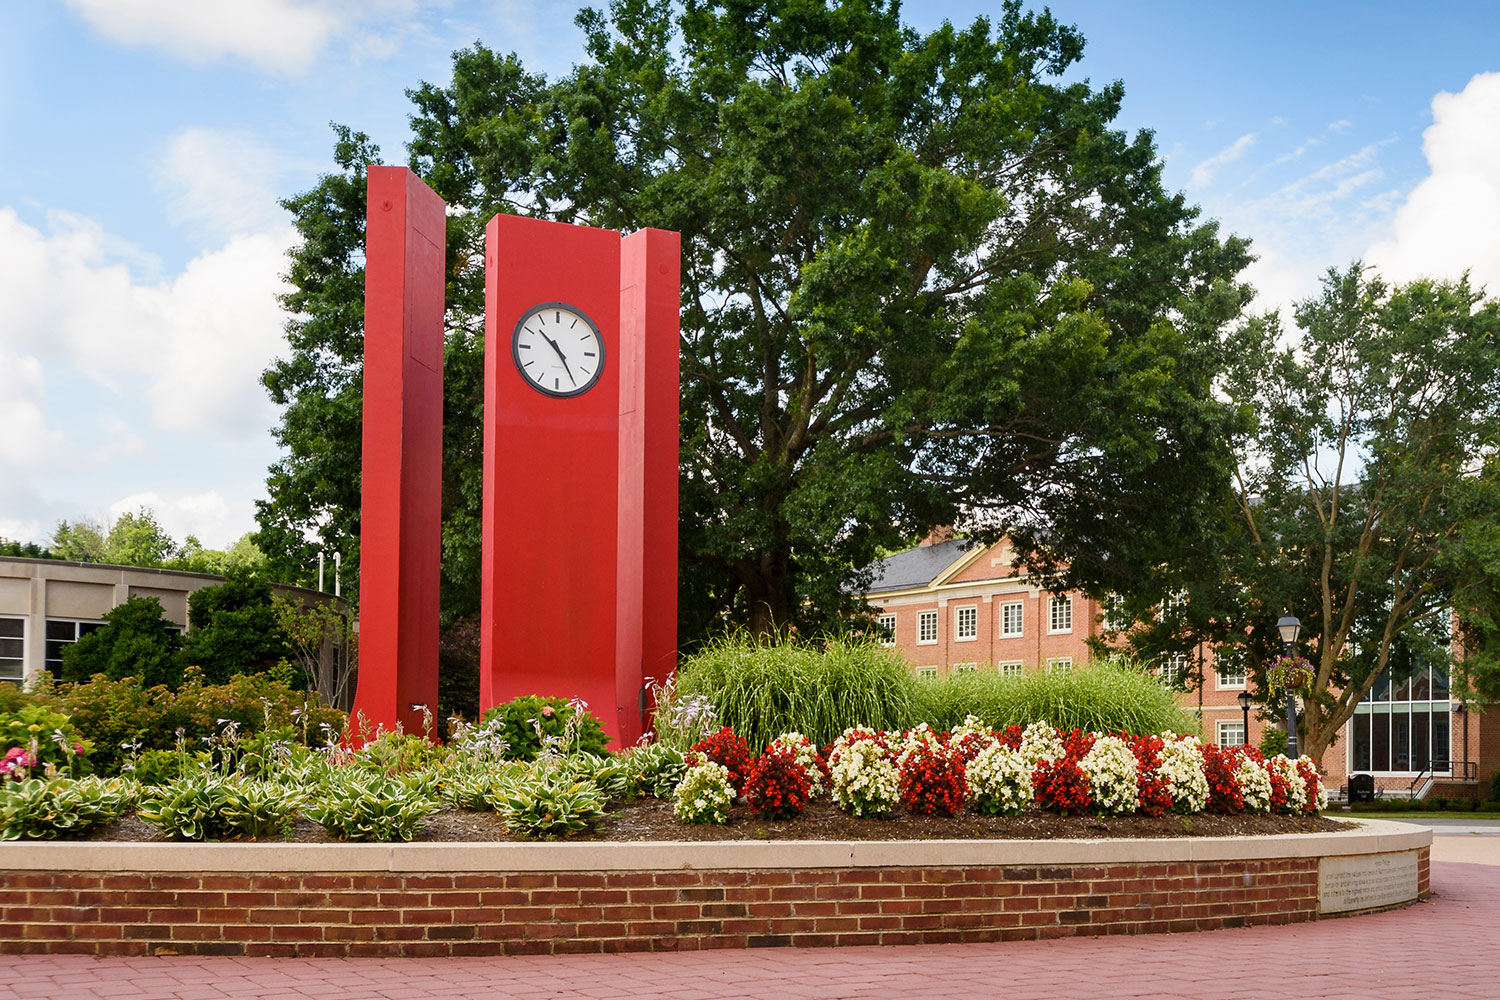 Photo of the Heth Clocks on campus to signal time.